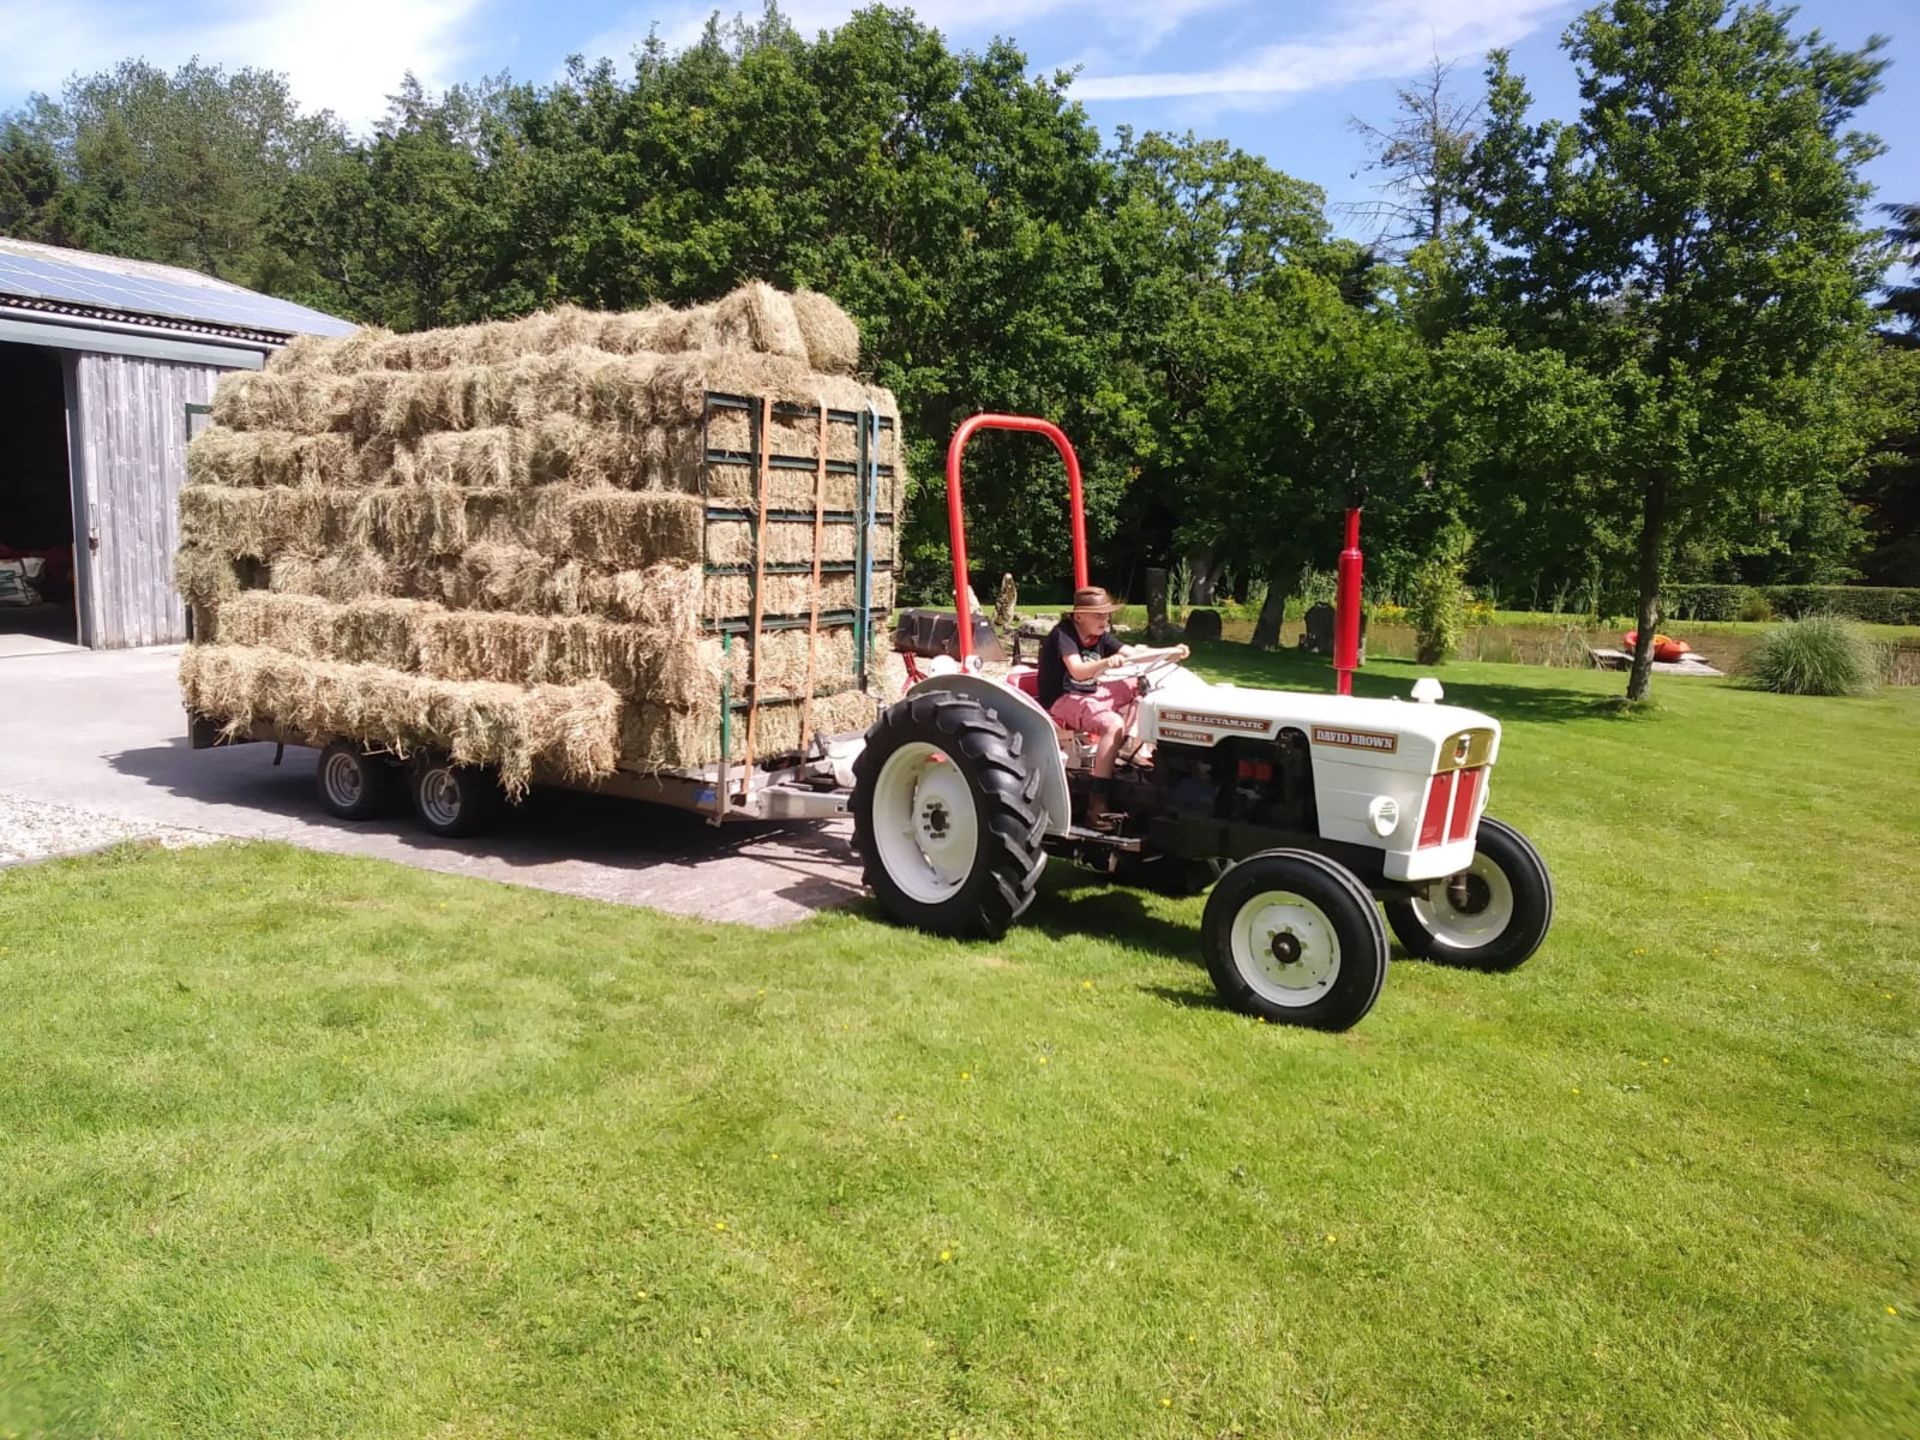 25 CONVENTIONAL BALES OF 2021 MEADOW HAY